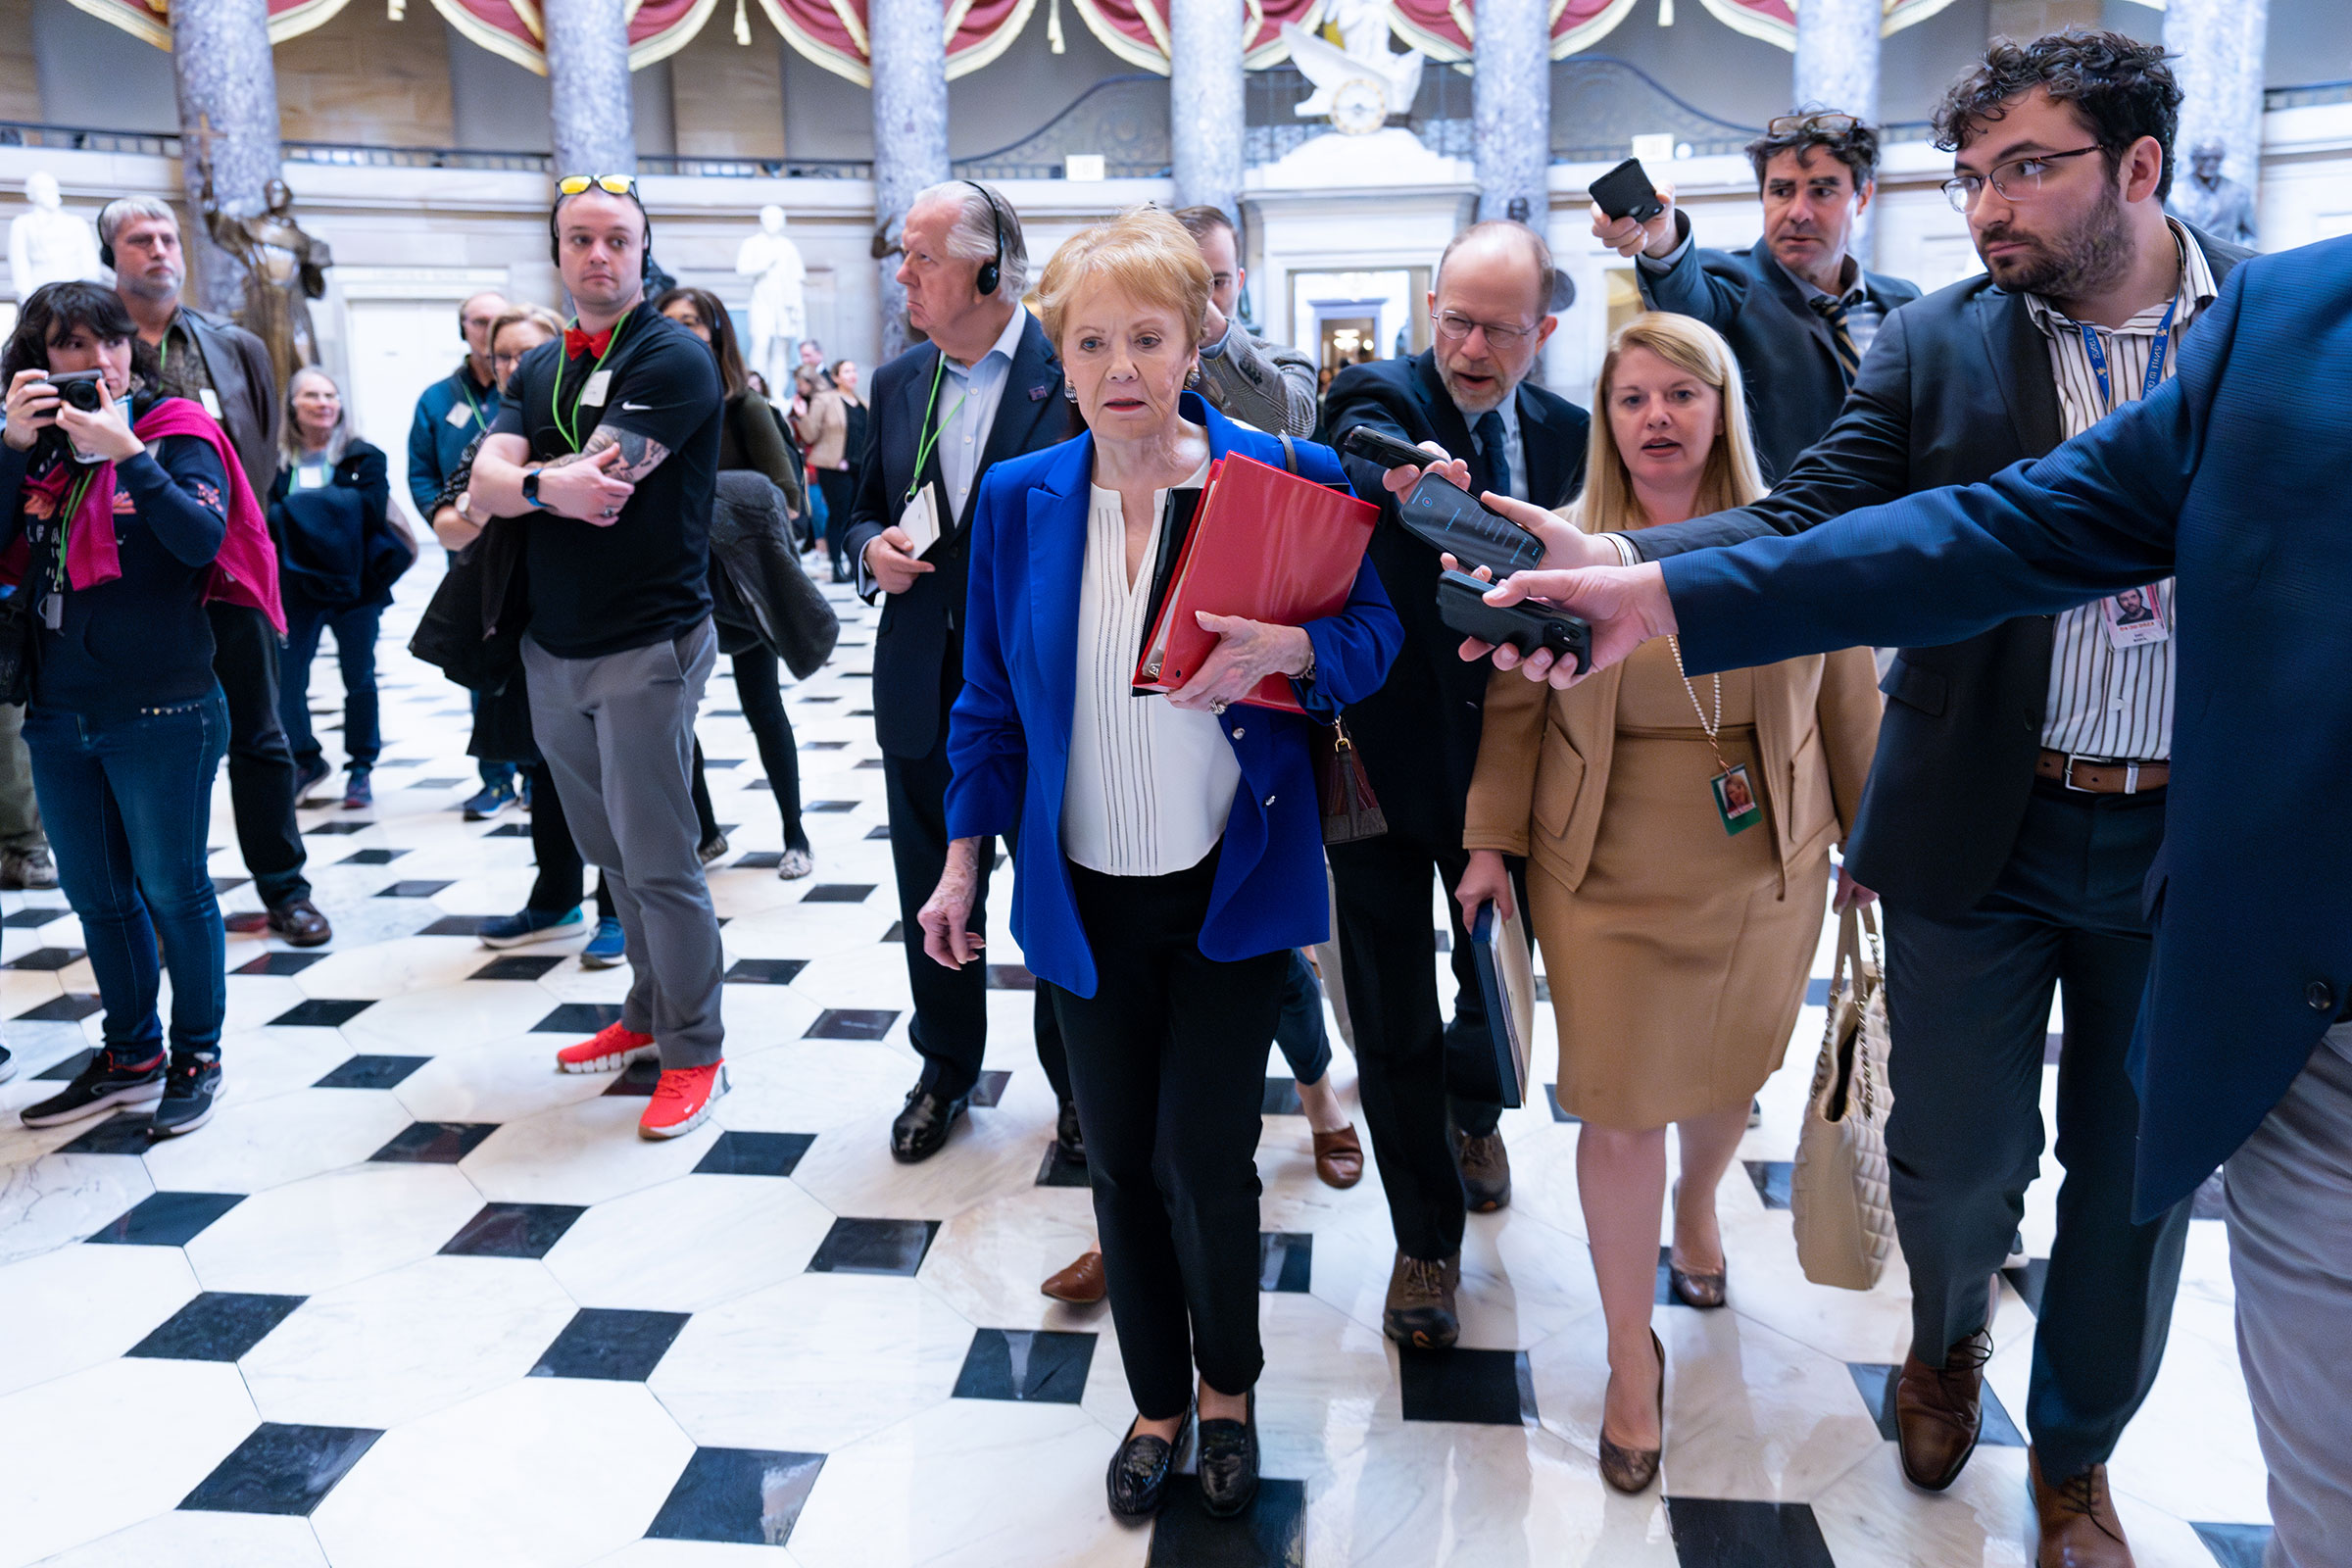 Rep. Kay Granger is interviewed by journalists holding out recording devices as she walks